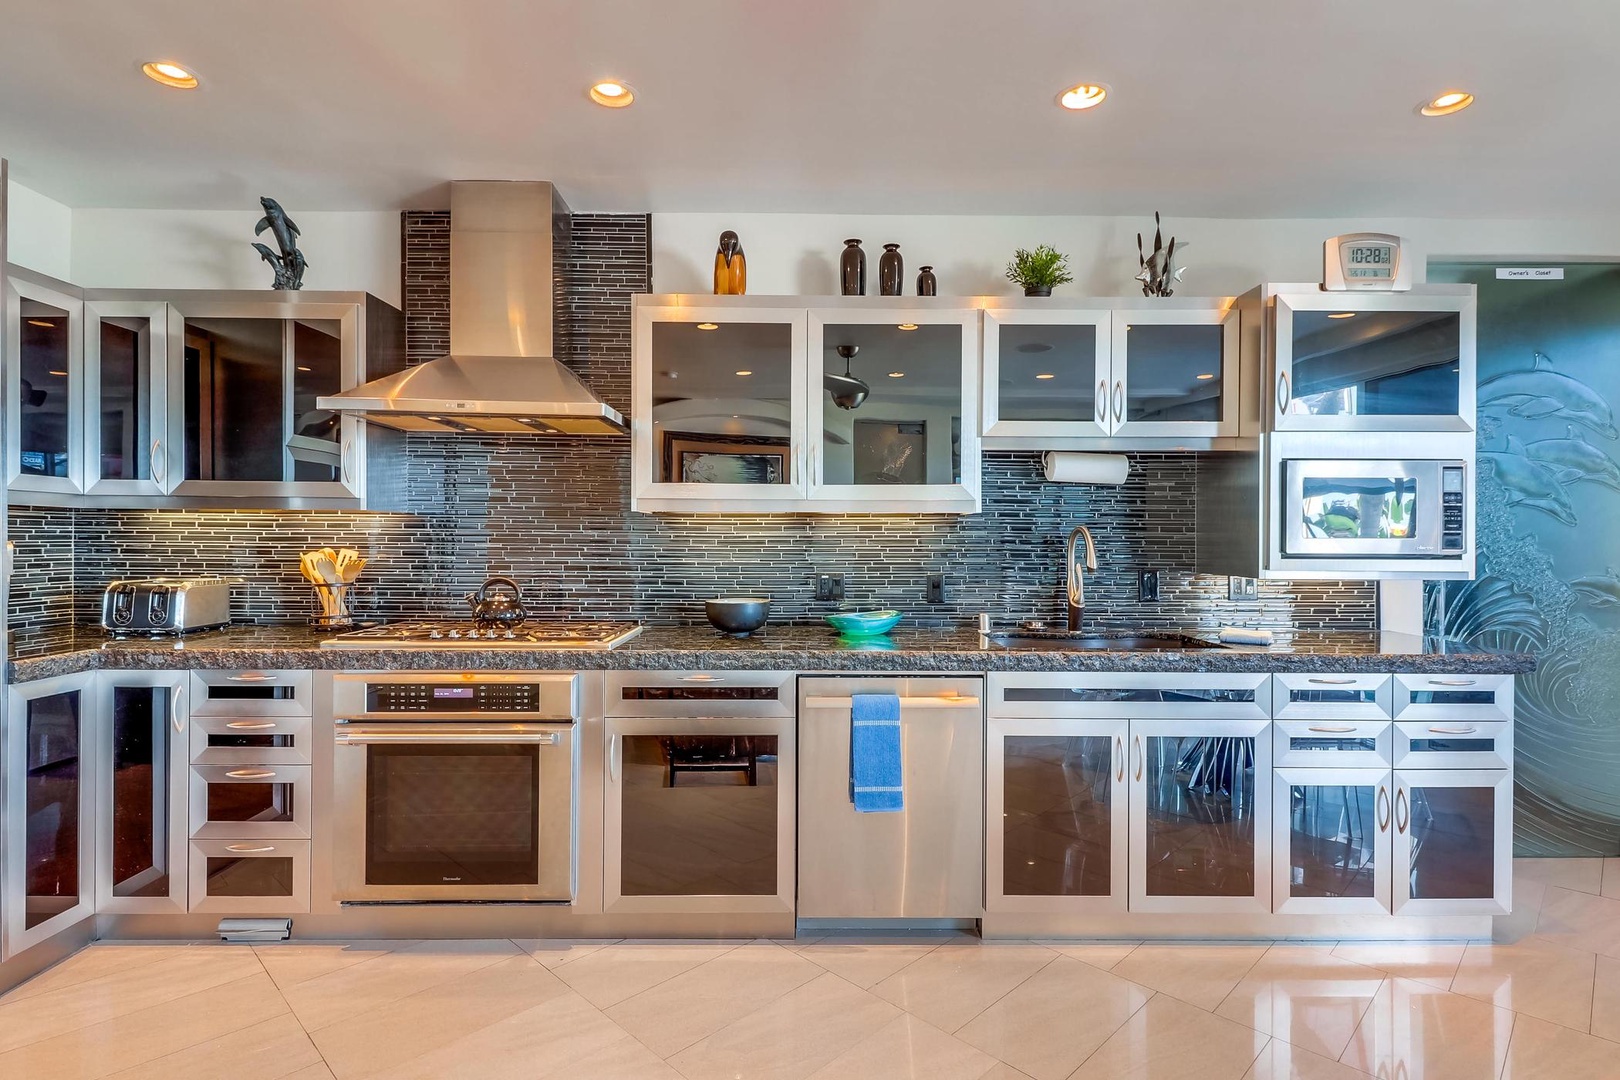 High-end stainless appliances